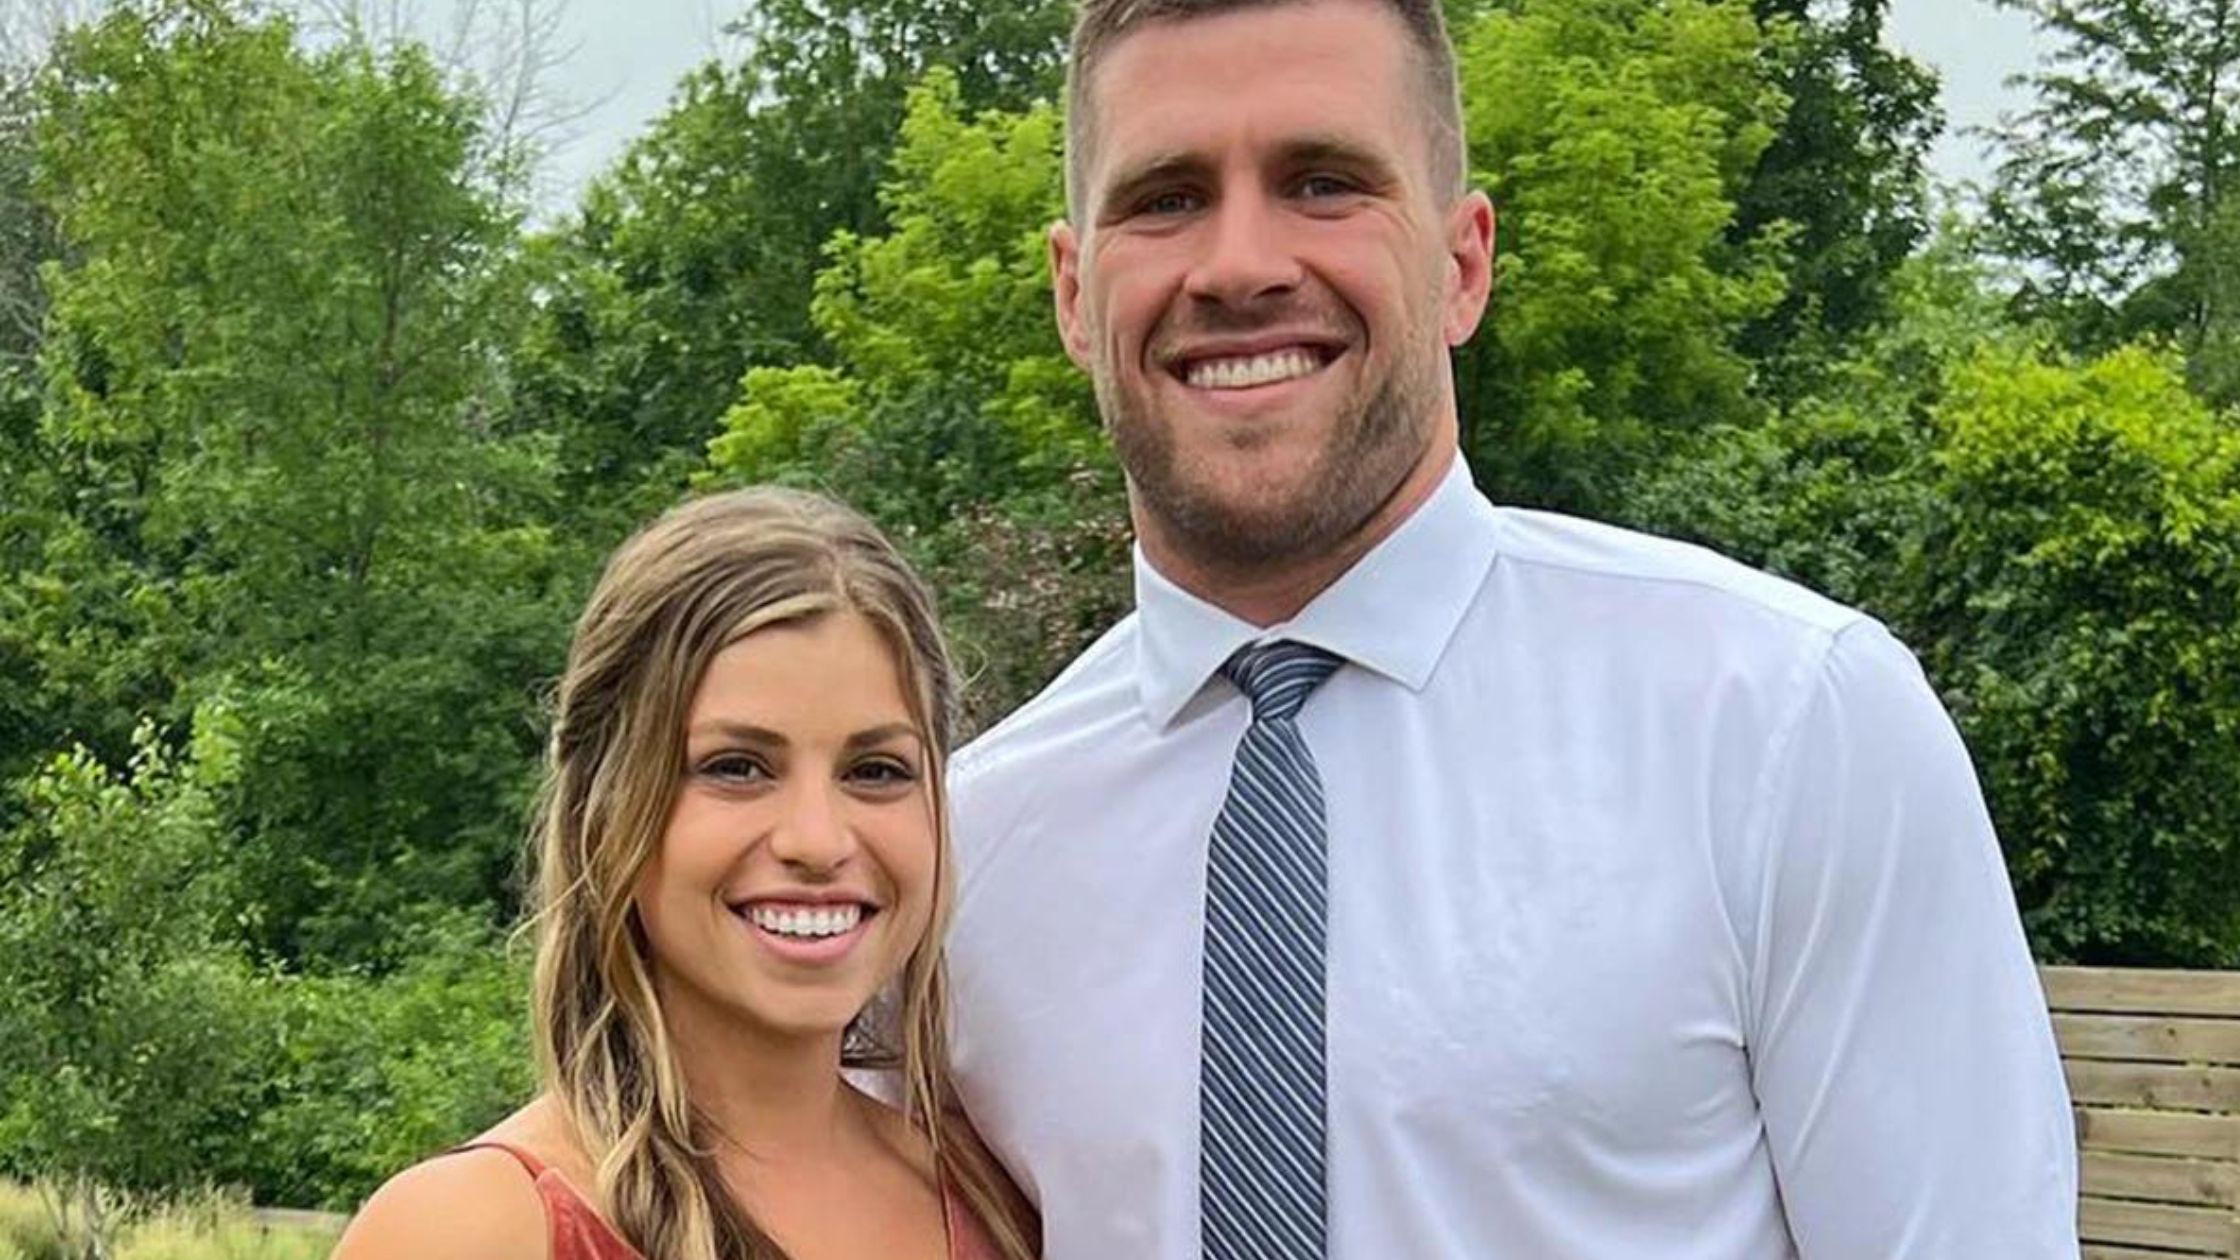 Pittsburgh Steelers Star TJ Watt And Soccer Star Dani Rhodes Got Married At A Beachside Ceremony